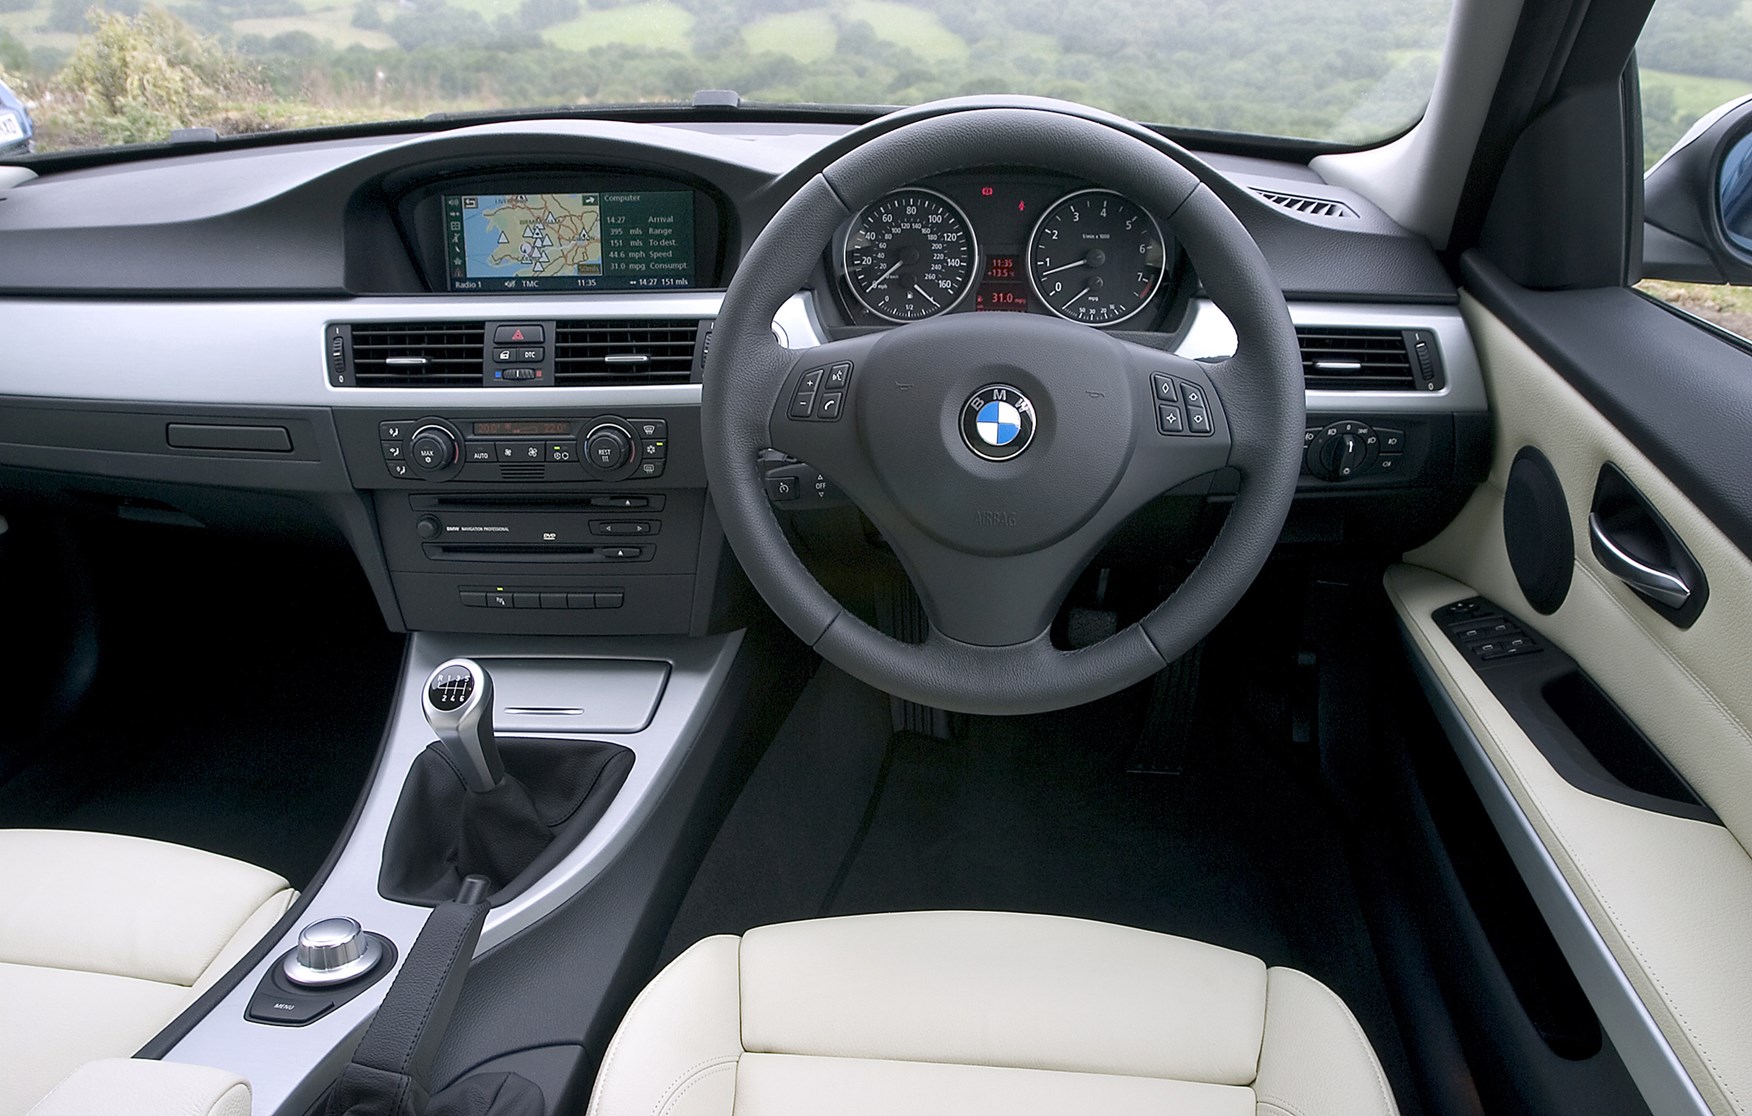 Bruise out of service contrast Used BMW 3-Series Touring (2005 - 2012) Review | Parkers